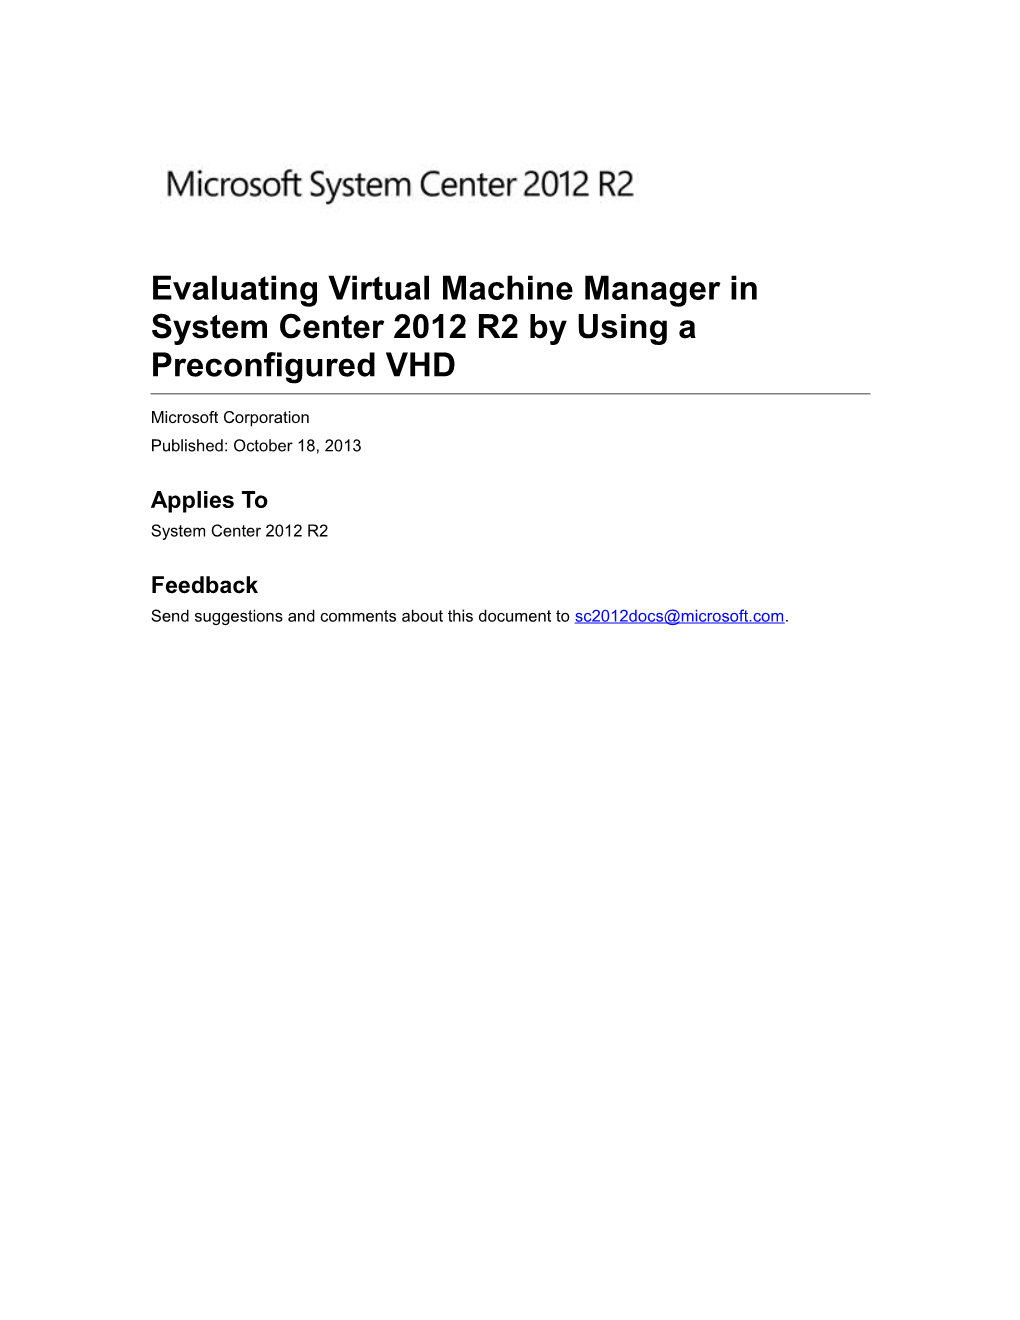 Evaluating Virtual Machine Manager in System Center 2012 R2 by Using a Preconfigured VHD